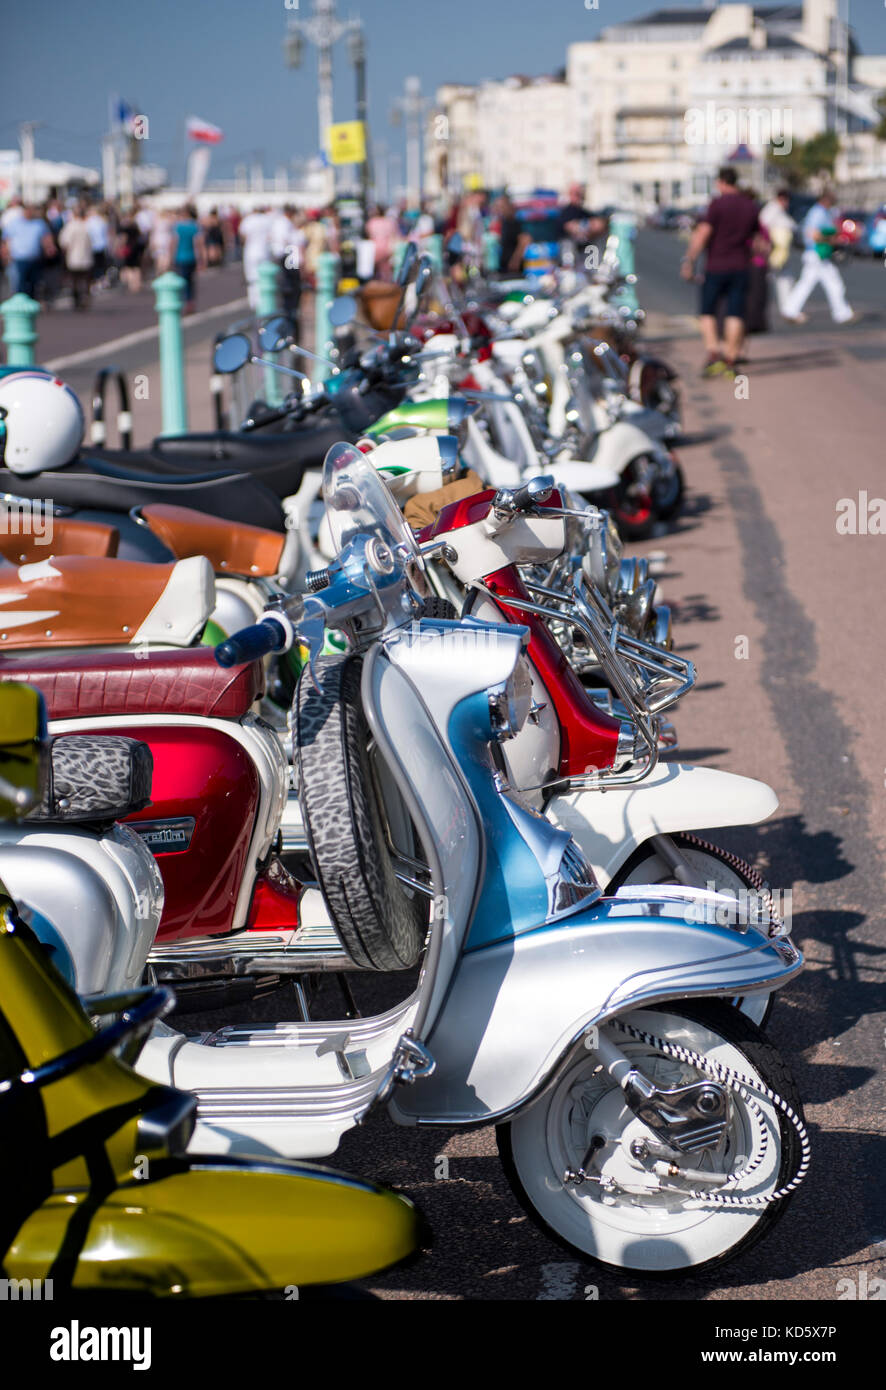 Brighton Mod Rally, August Bank Holiday Scooters lined up on show Stock Photo